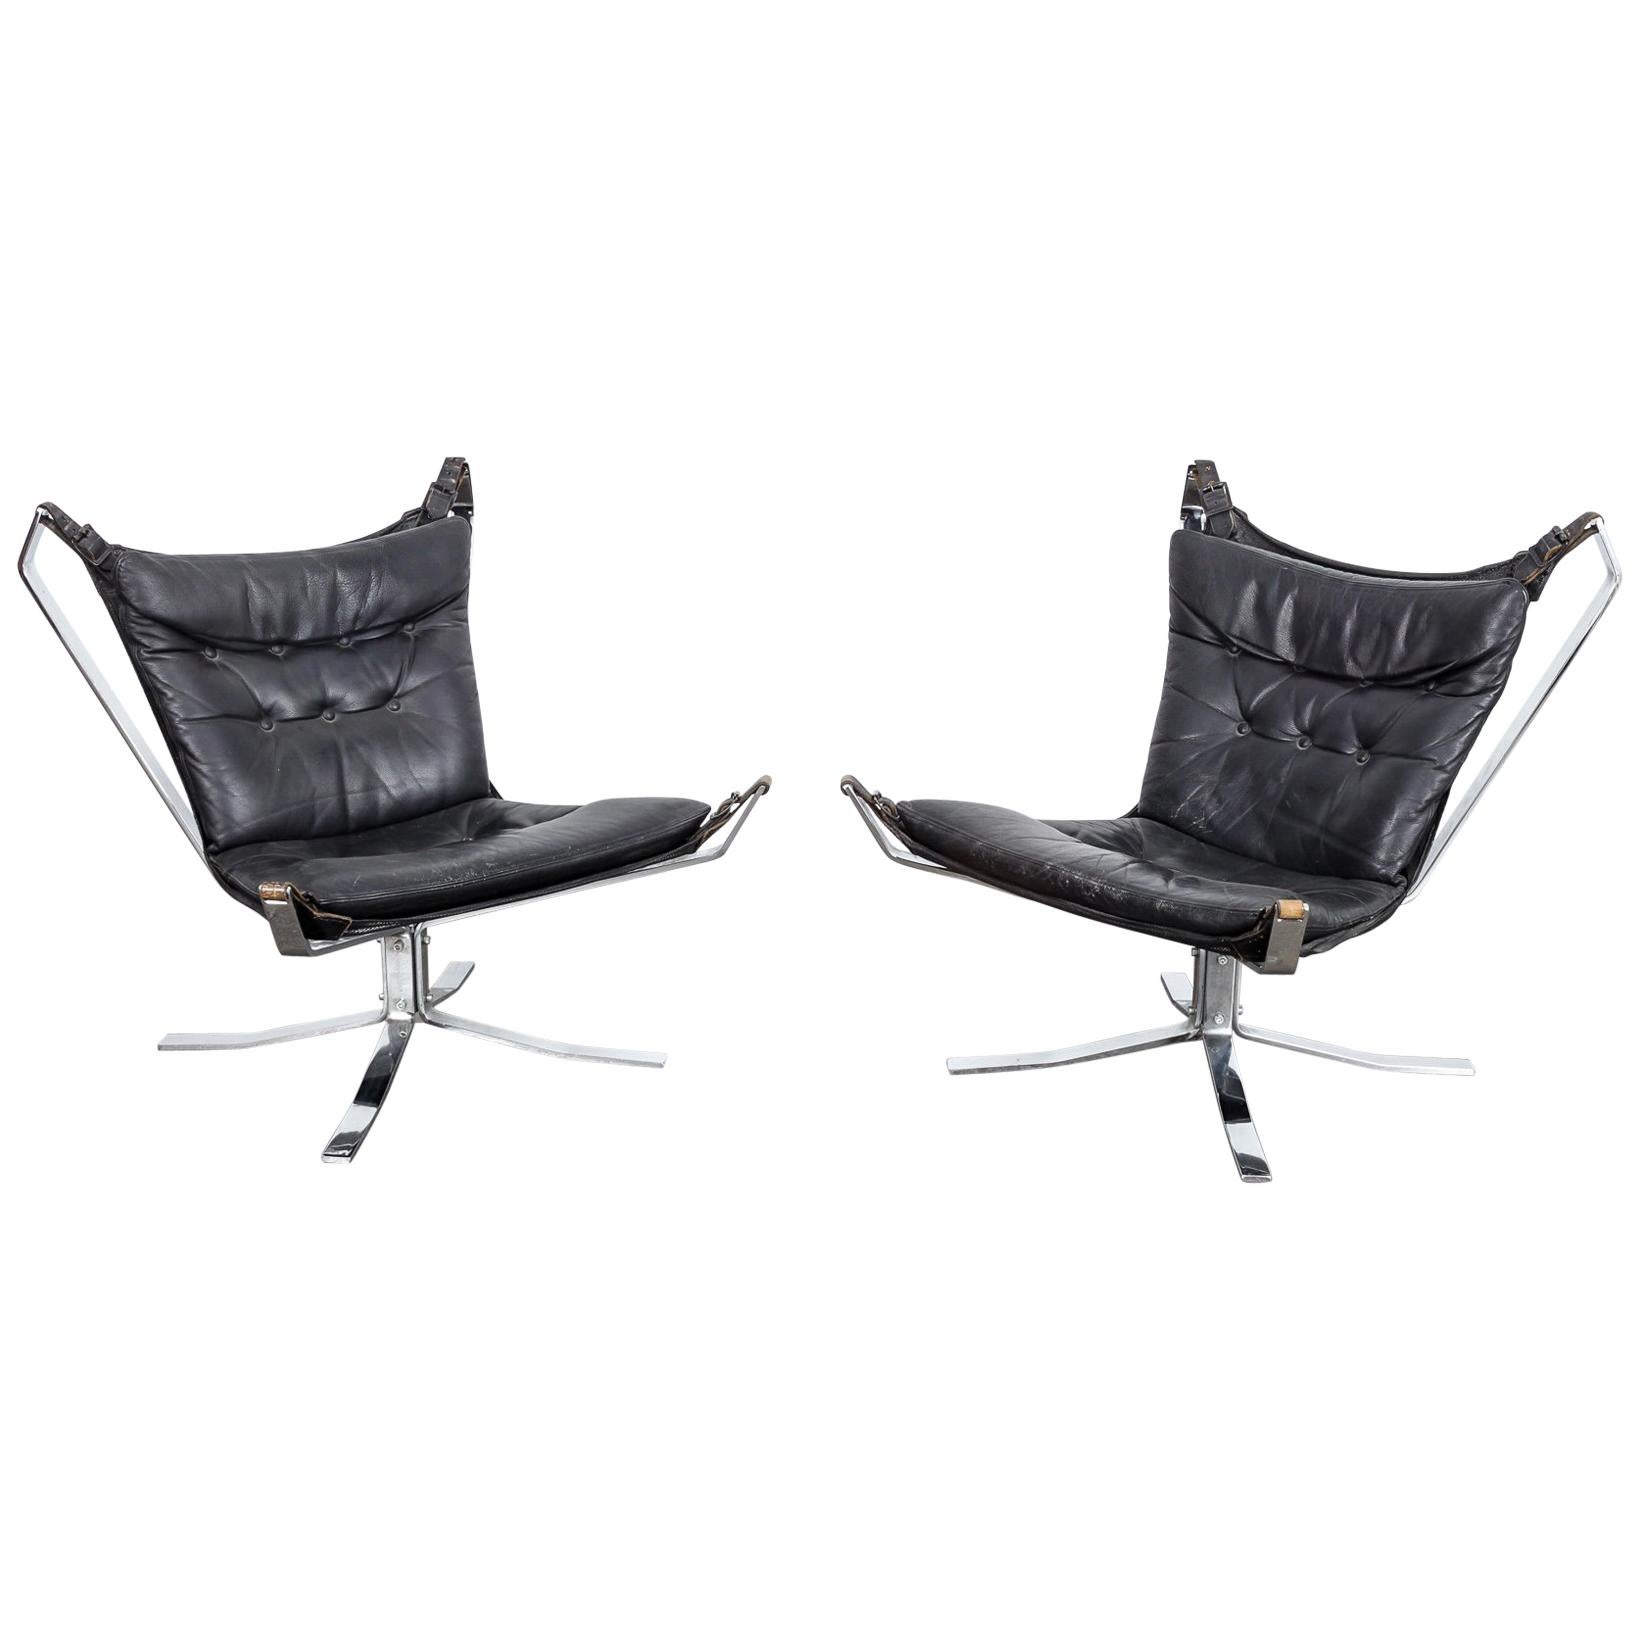 Pair of Black Leather and Chrome Flat Bar 'Falcon' Style Chairs, Denmark, 1960s.